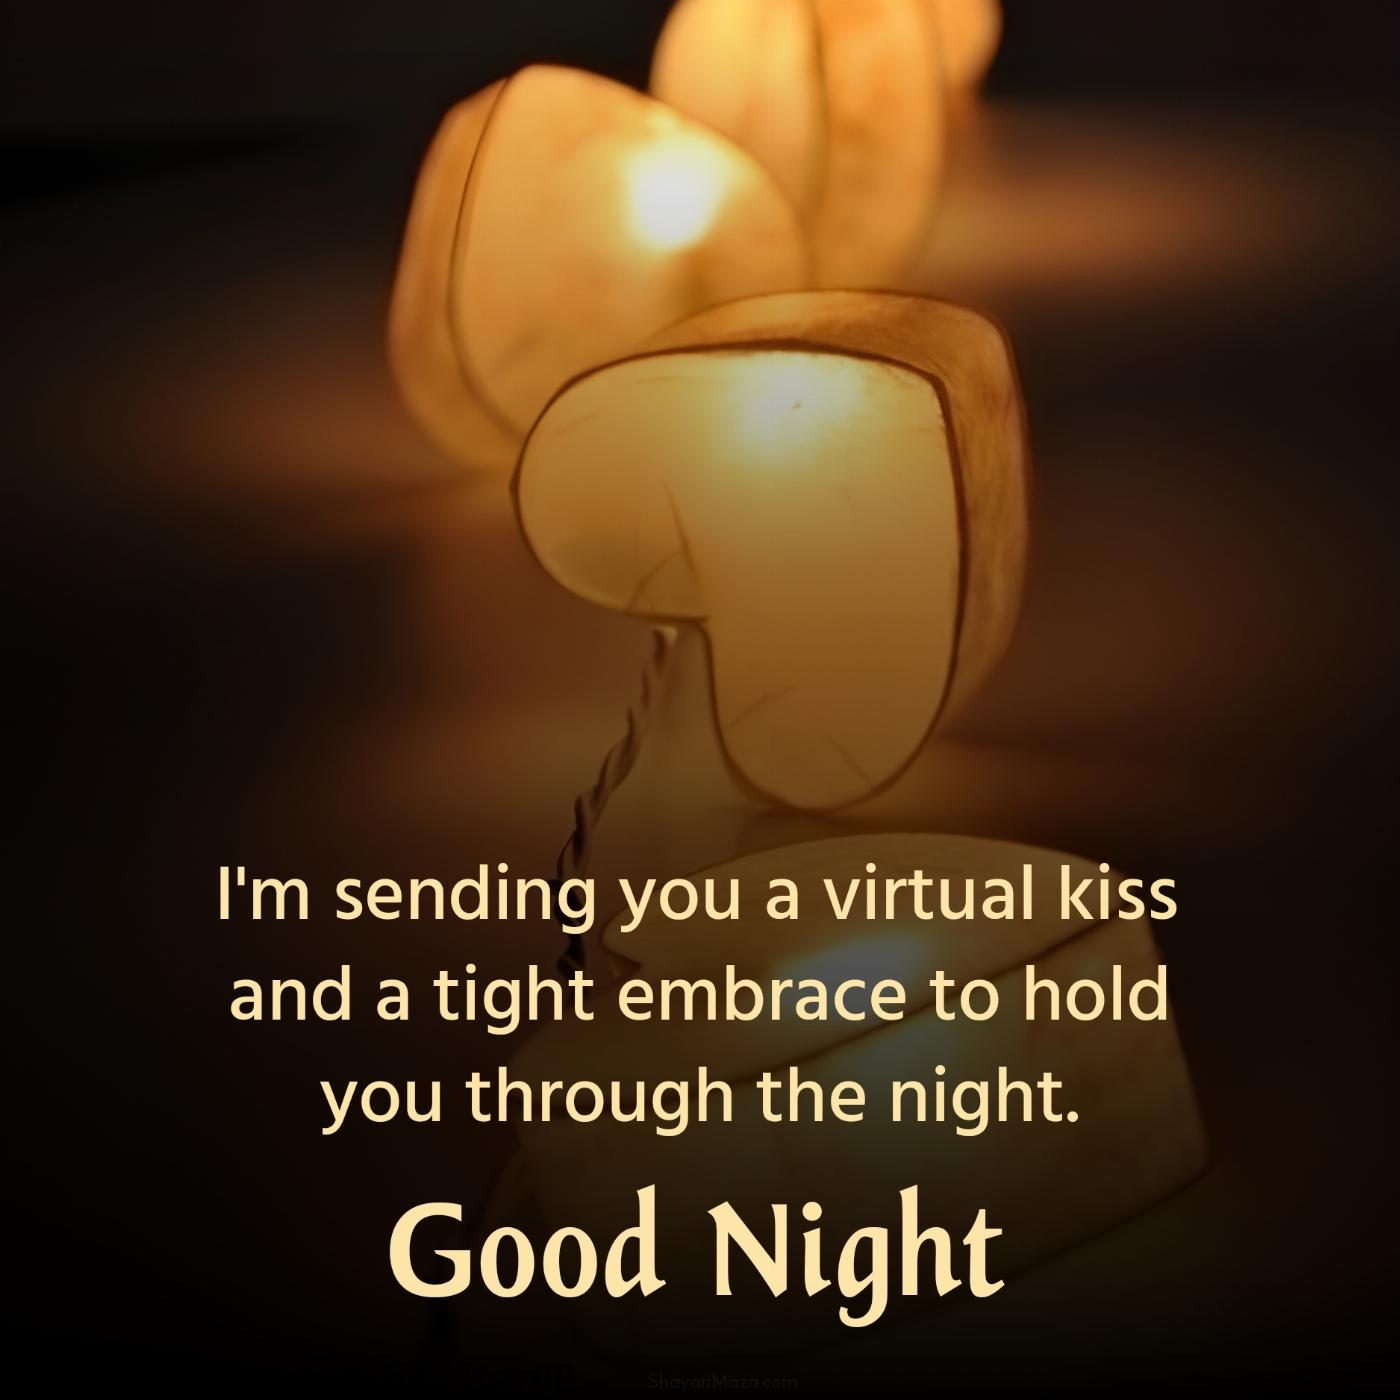 I'm sending you a virtual kiss and a tight embrace to hold you